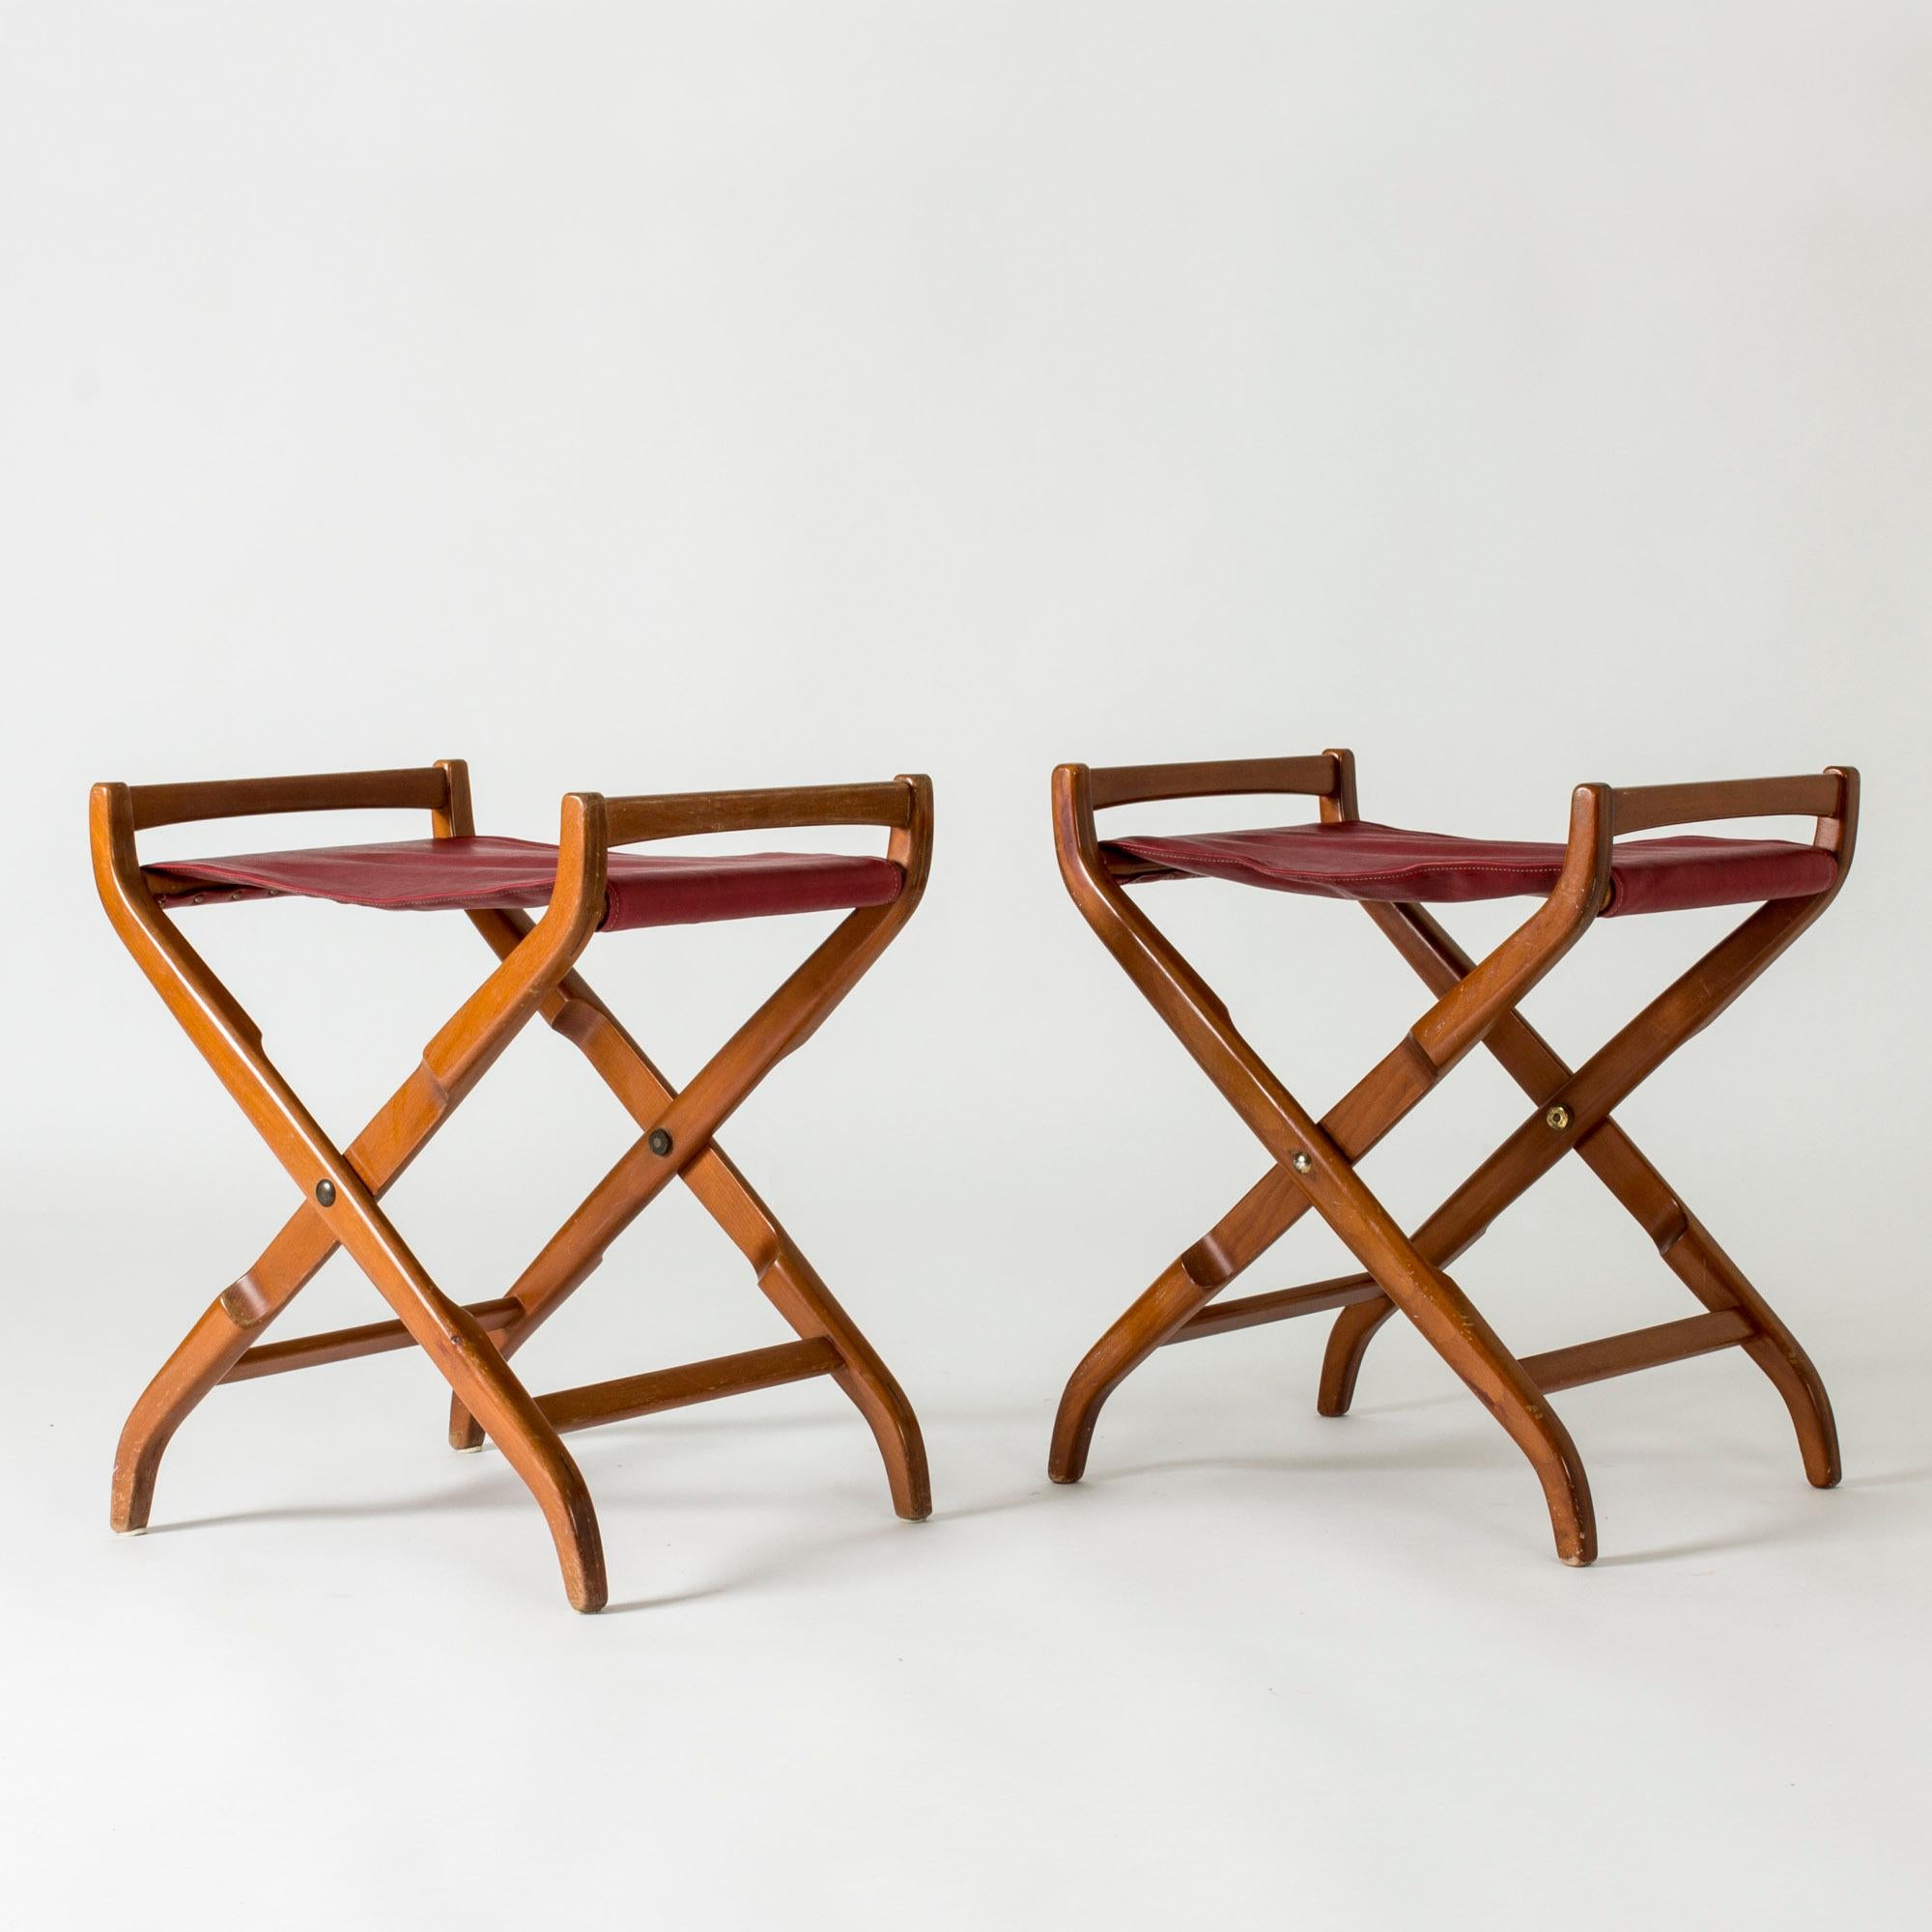 Pair of beautiful mahogany stools by David Rosén, with dark red leather seats. Possible to fold.